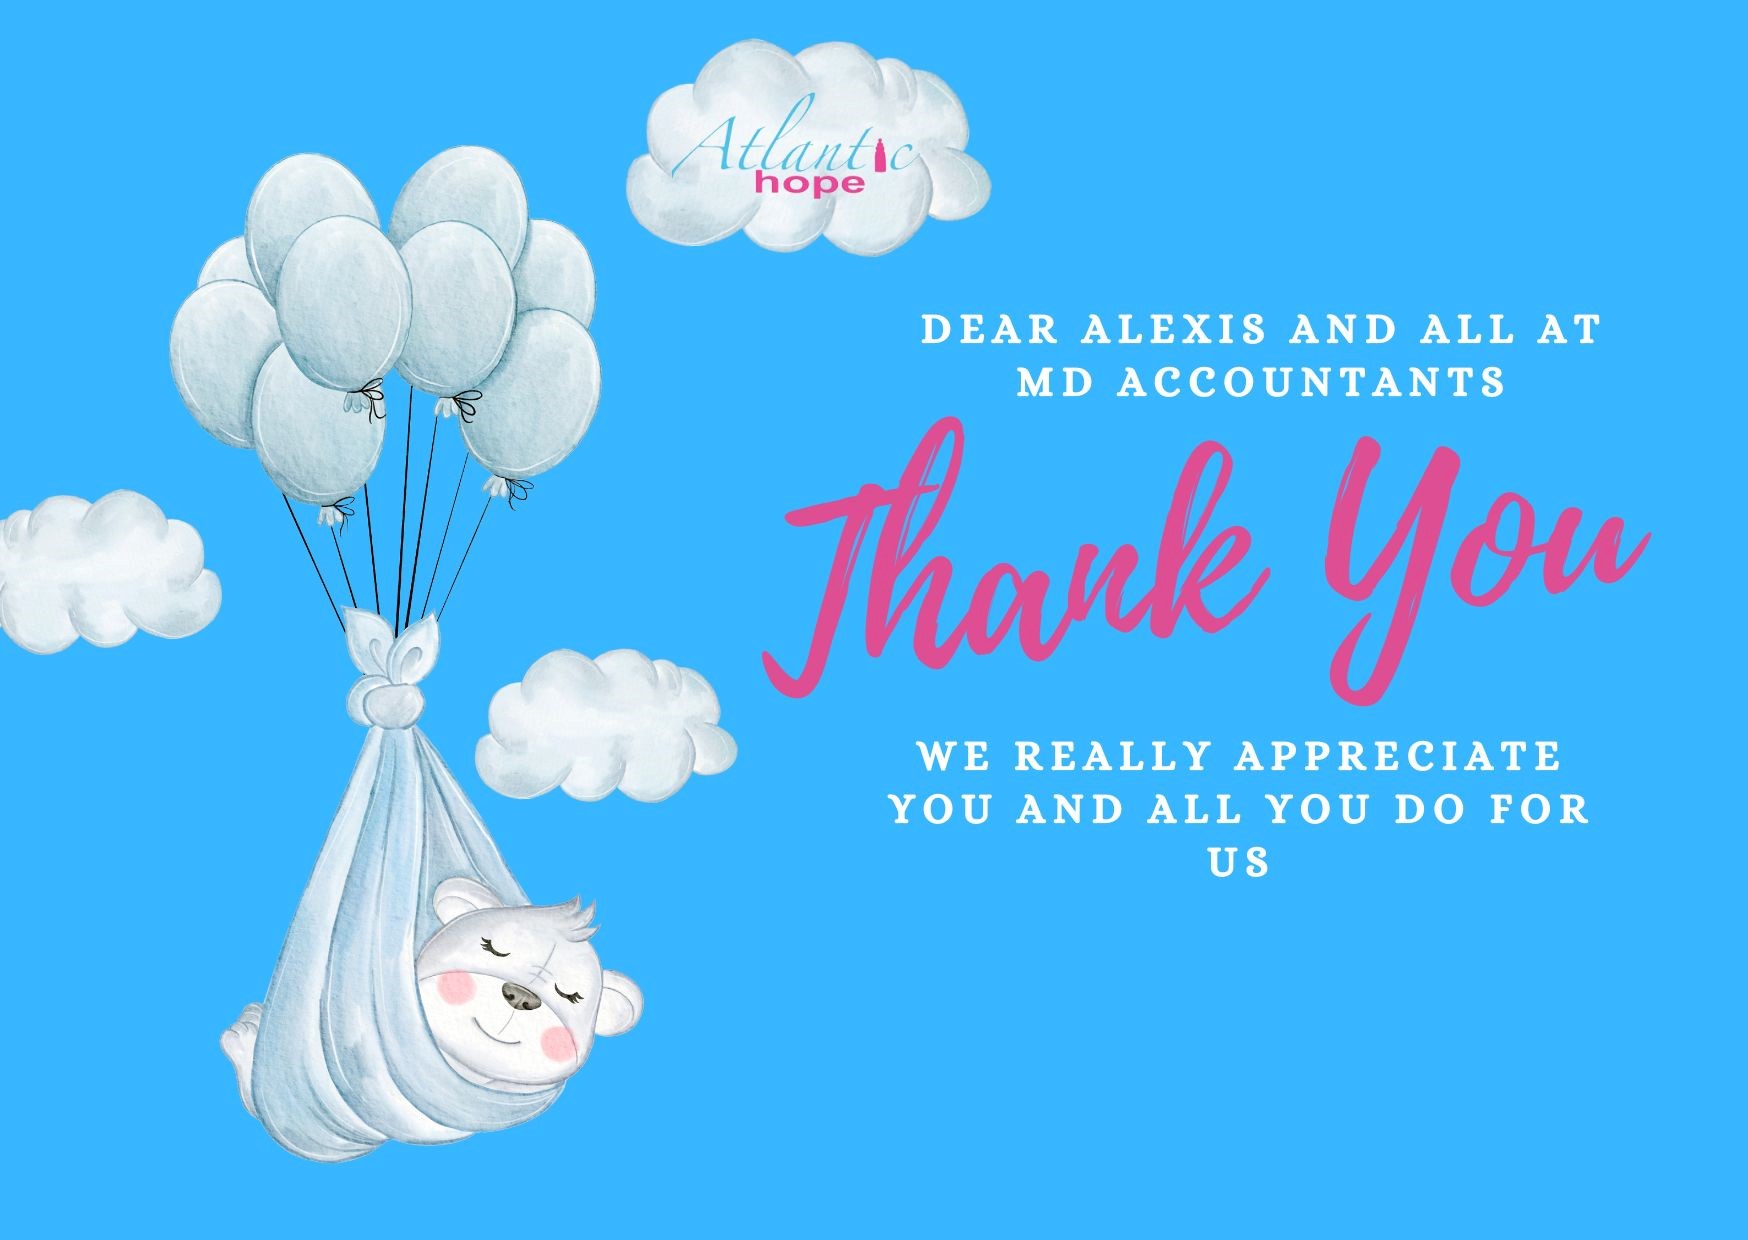 Thank You Alexis and all at MD Accountants